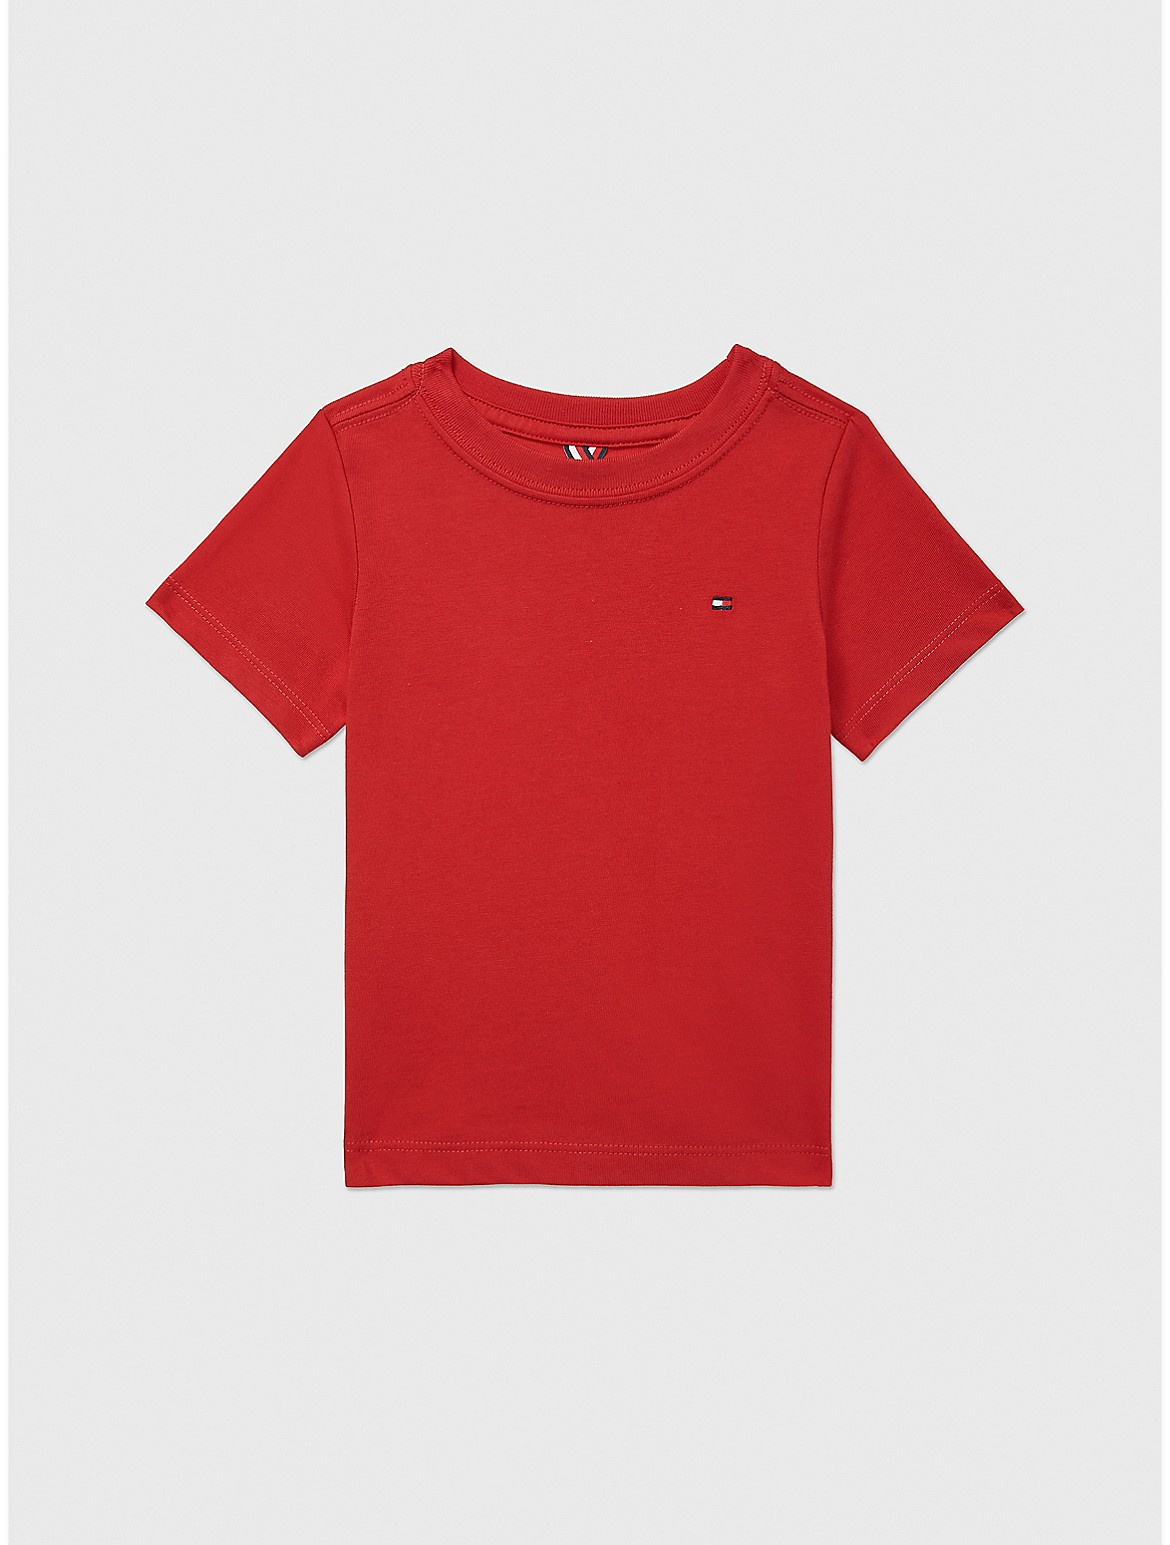 Tommy Hilfiger Boys' Babies' Solid T-Shirt - Red - 3-6M